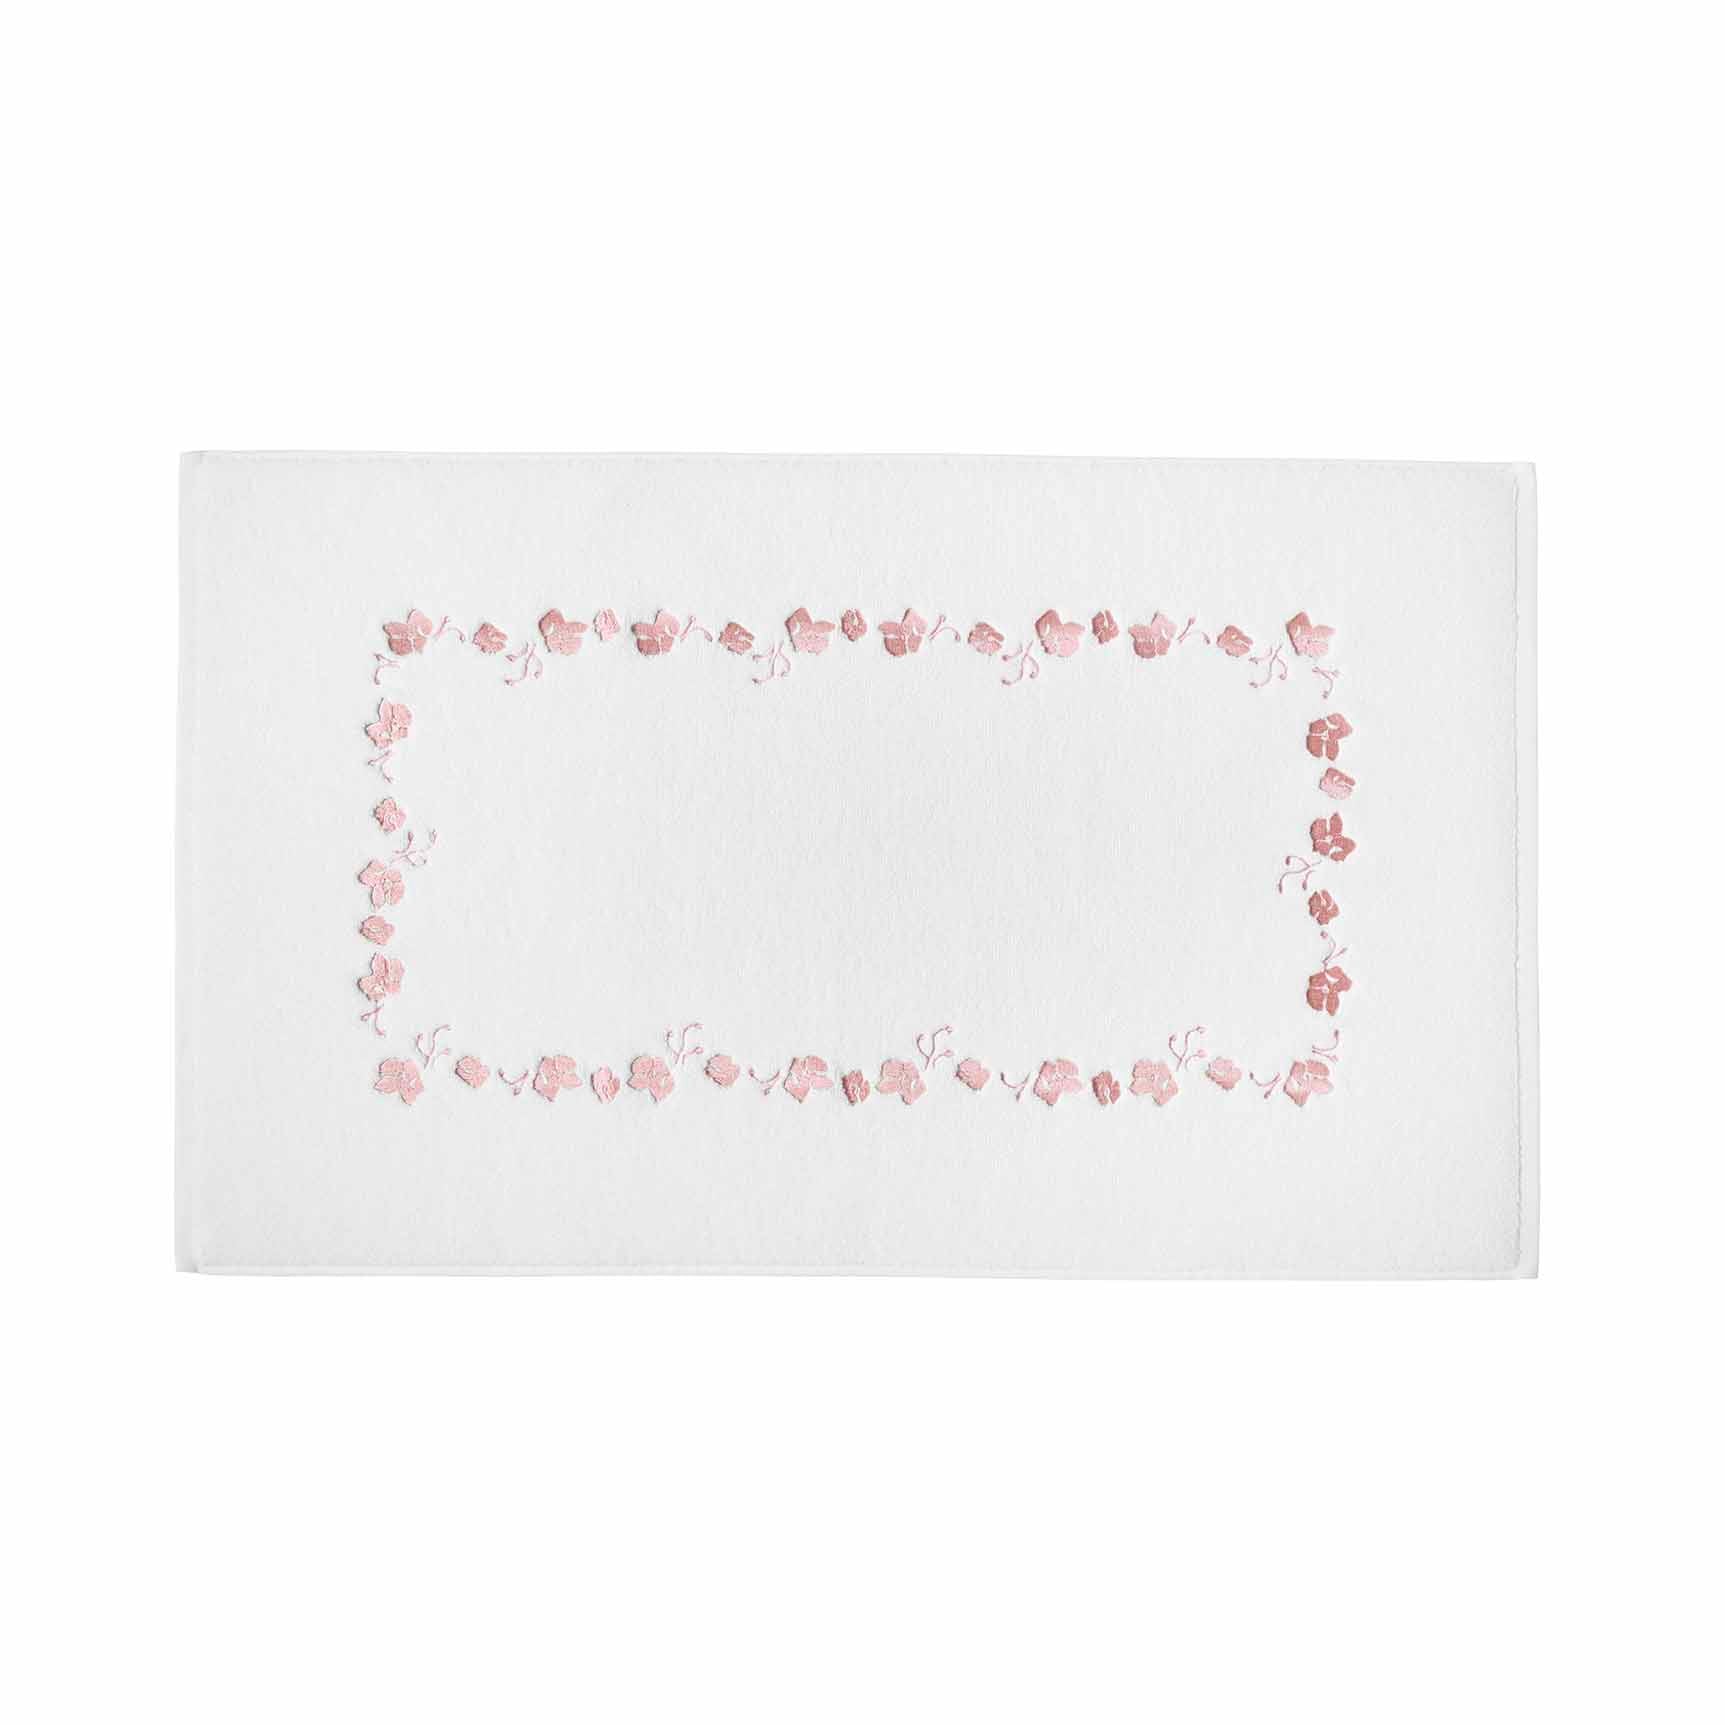 white bathmat with pink embroidered botanical pattern 